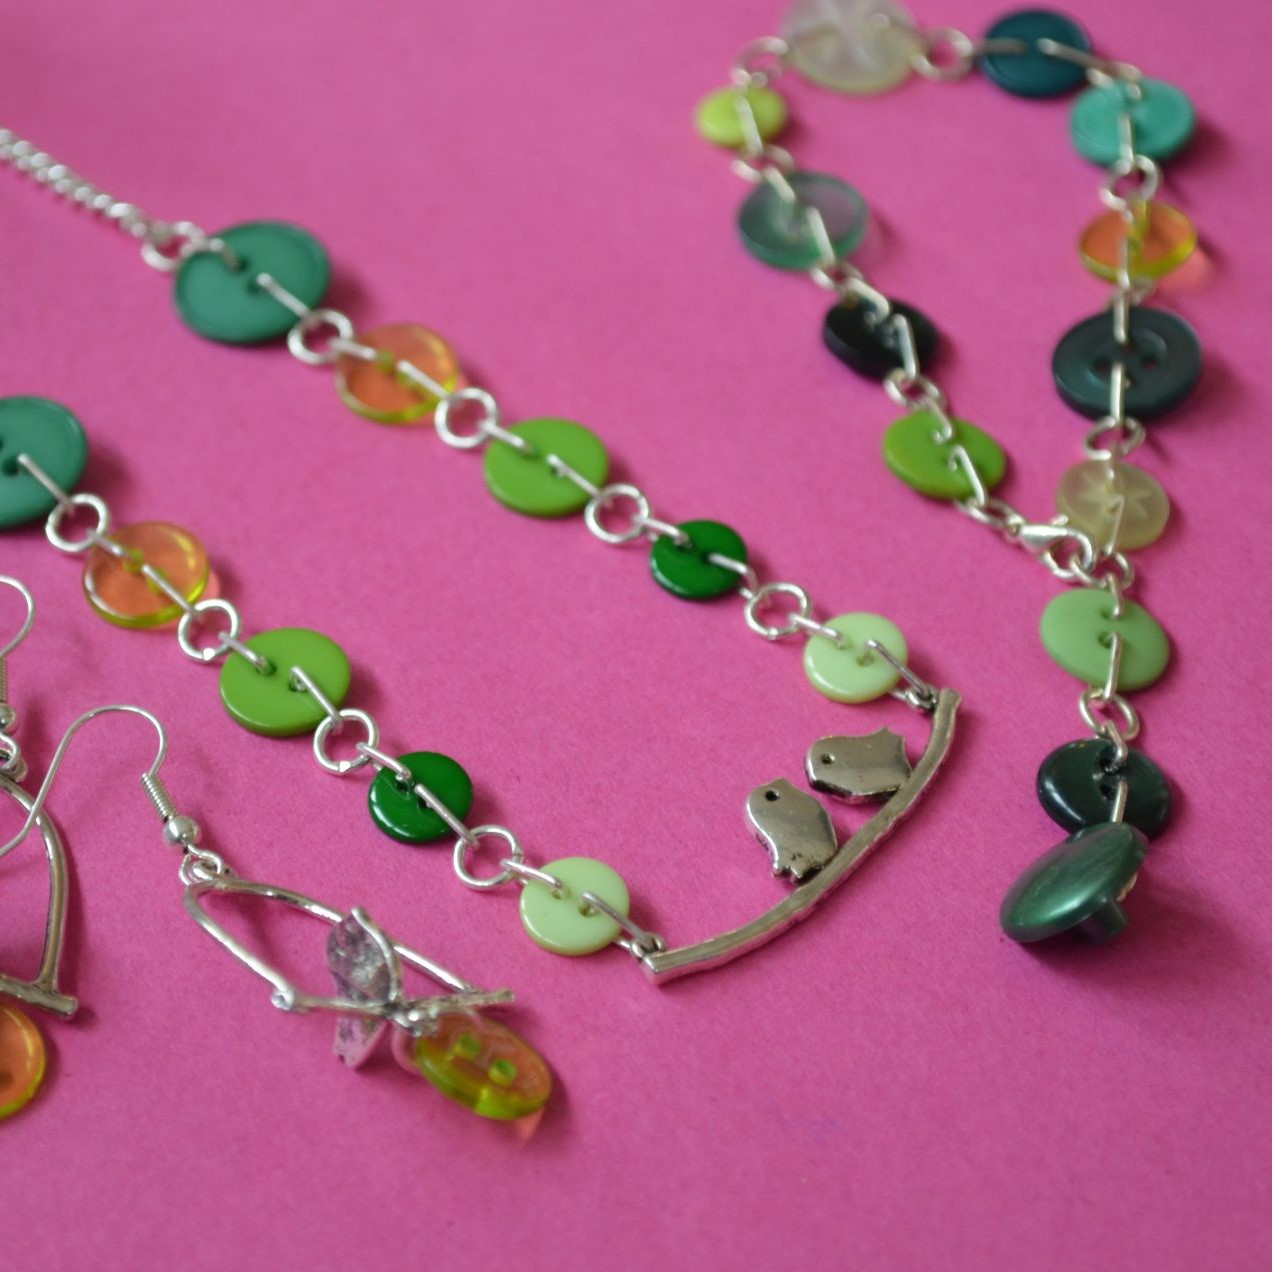 Green Bird on a Wire Necklace